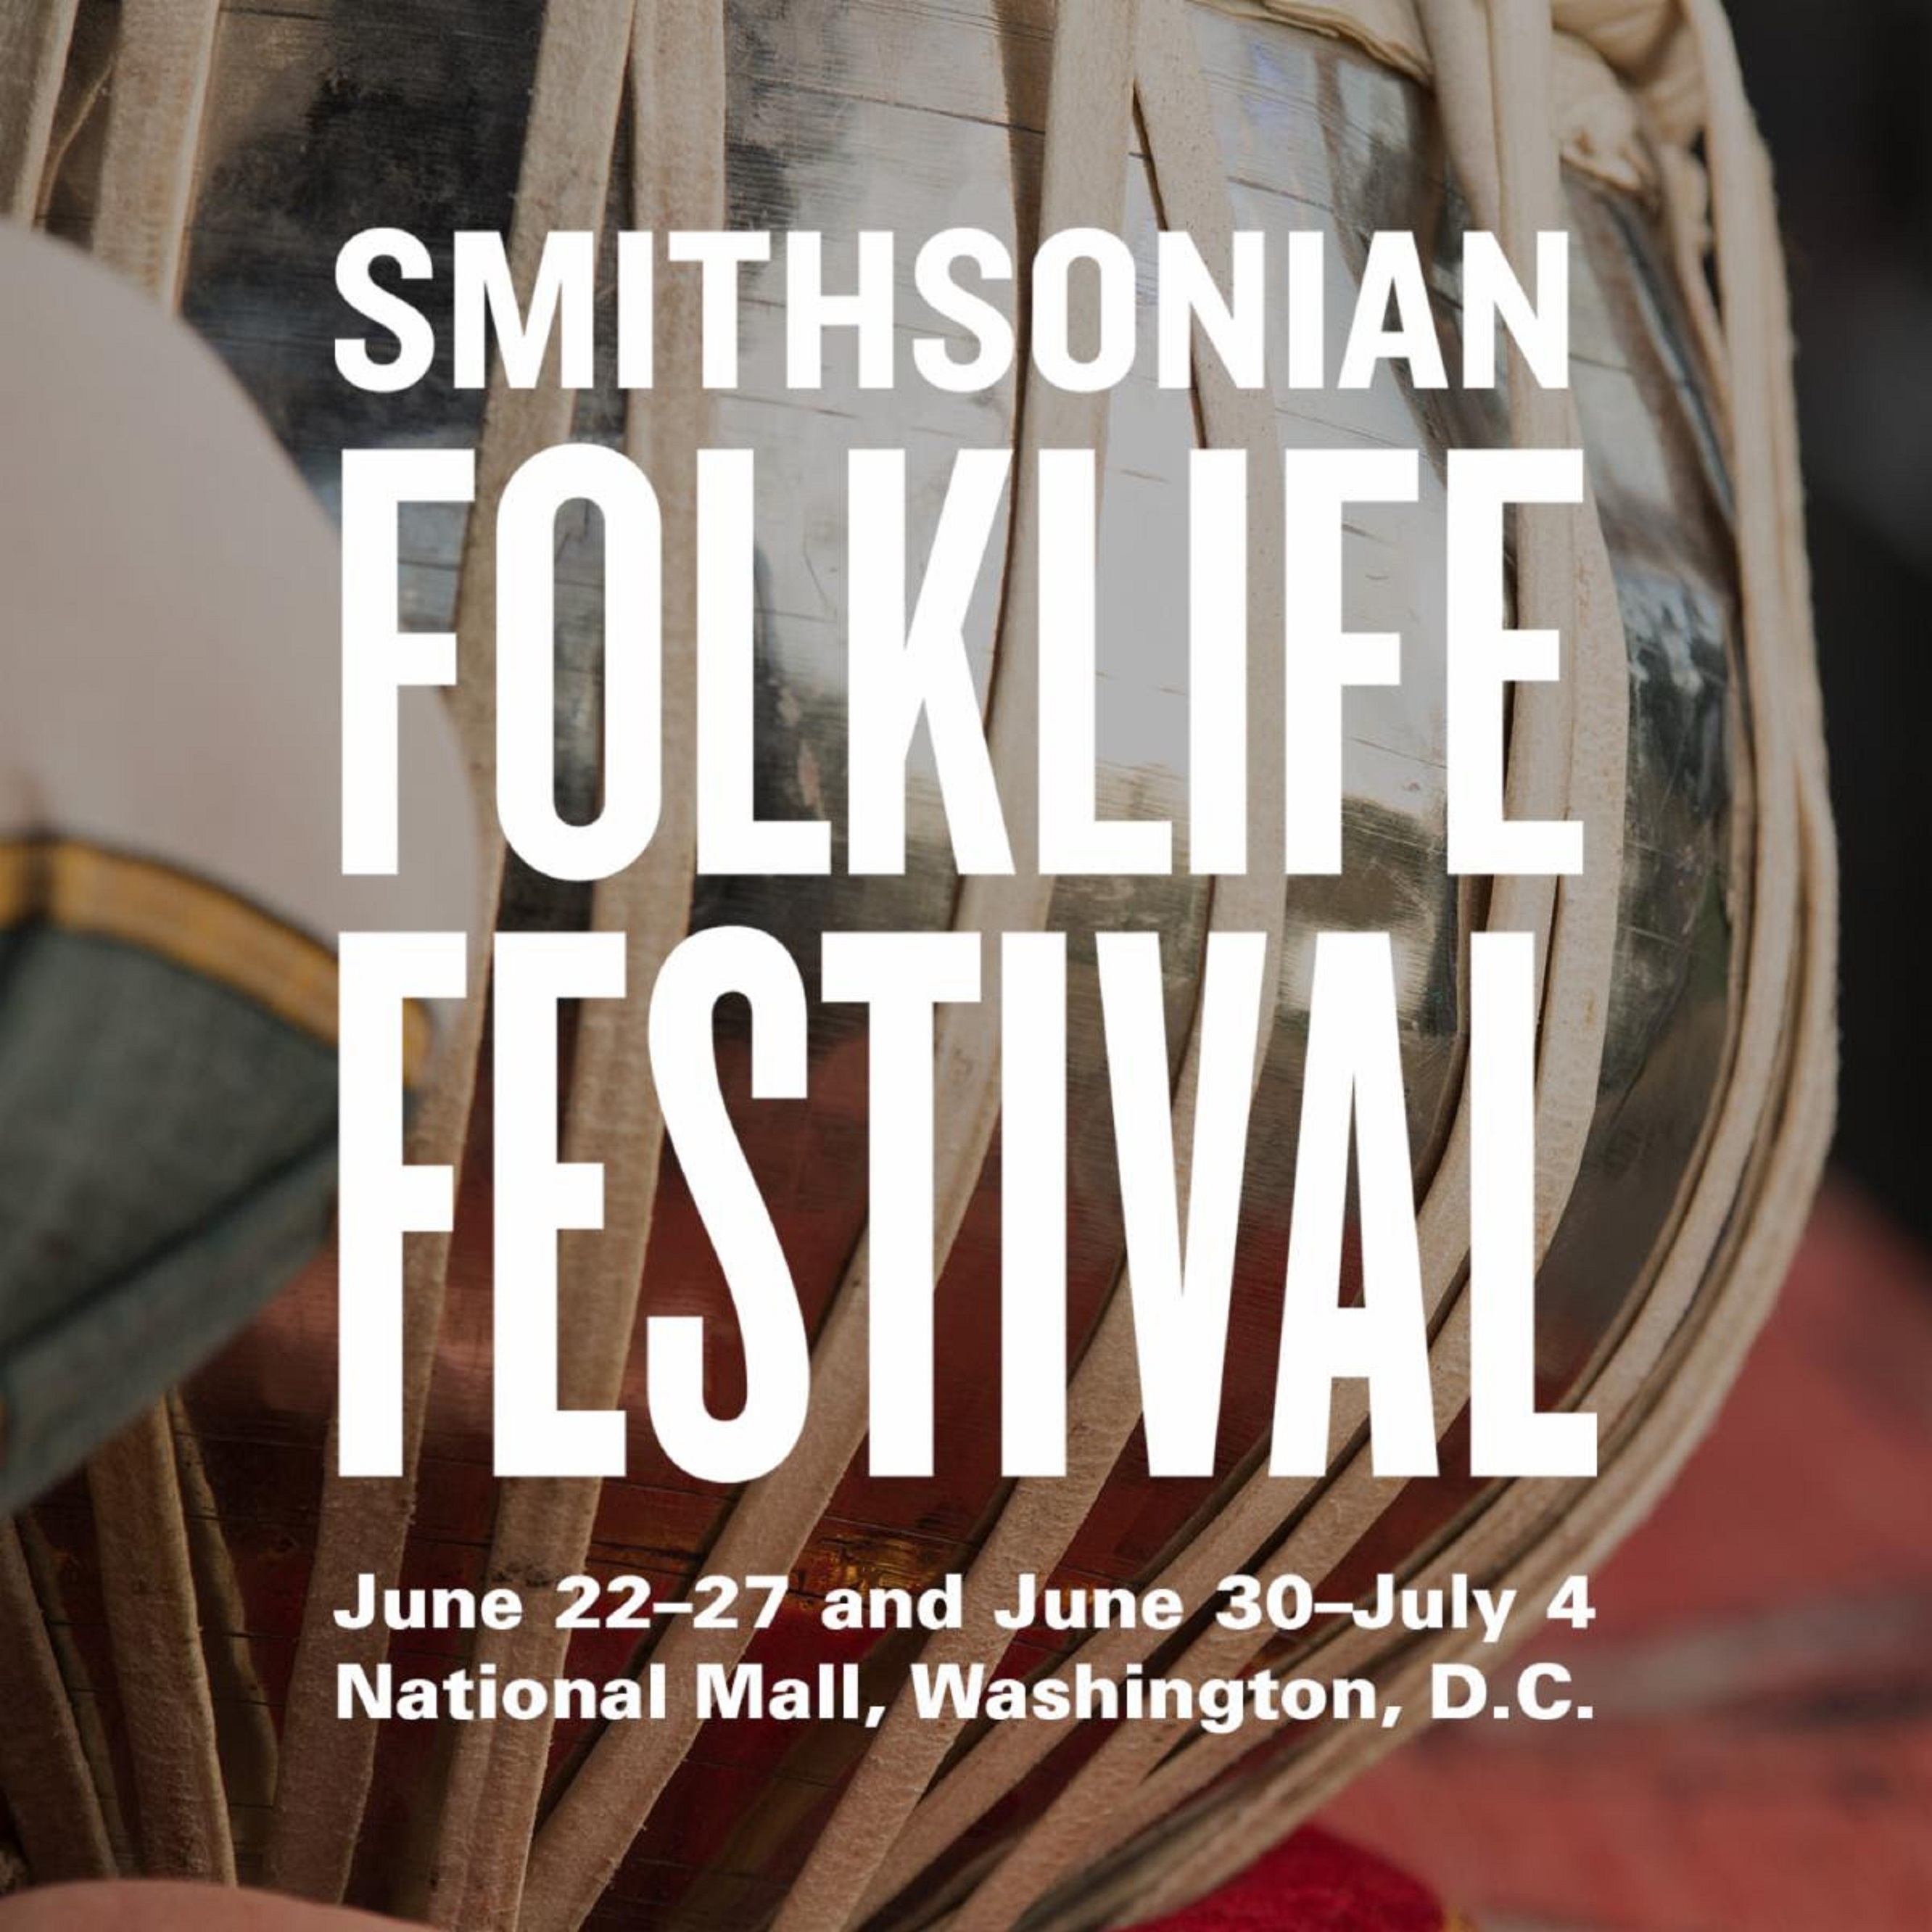 Smithsonian Folklife Festival Returns to the National Mall With Free Evening Concerts